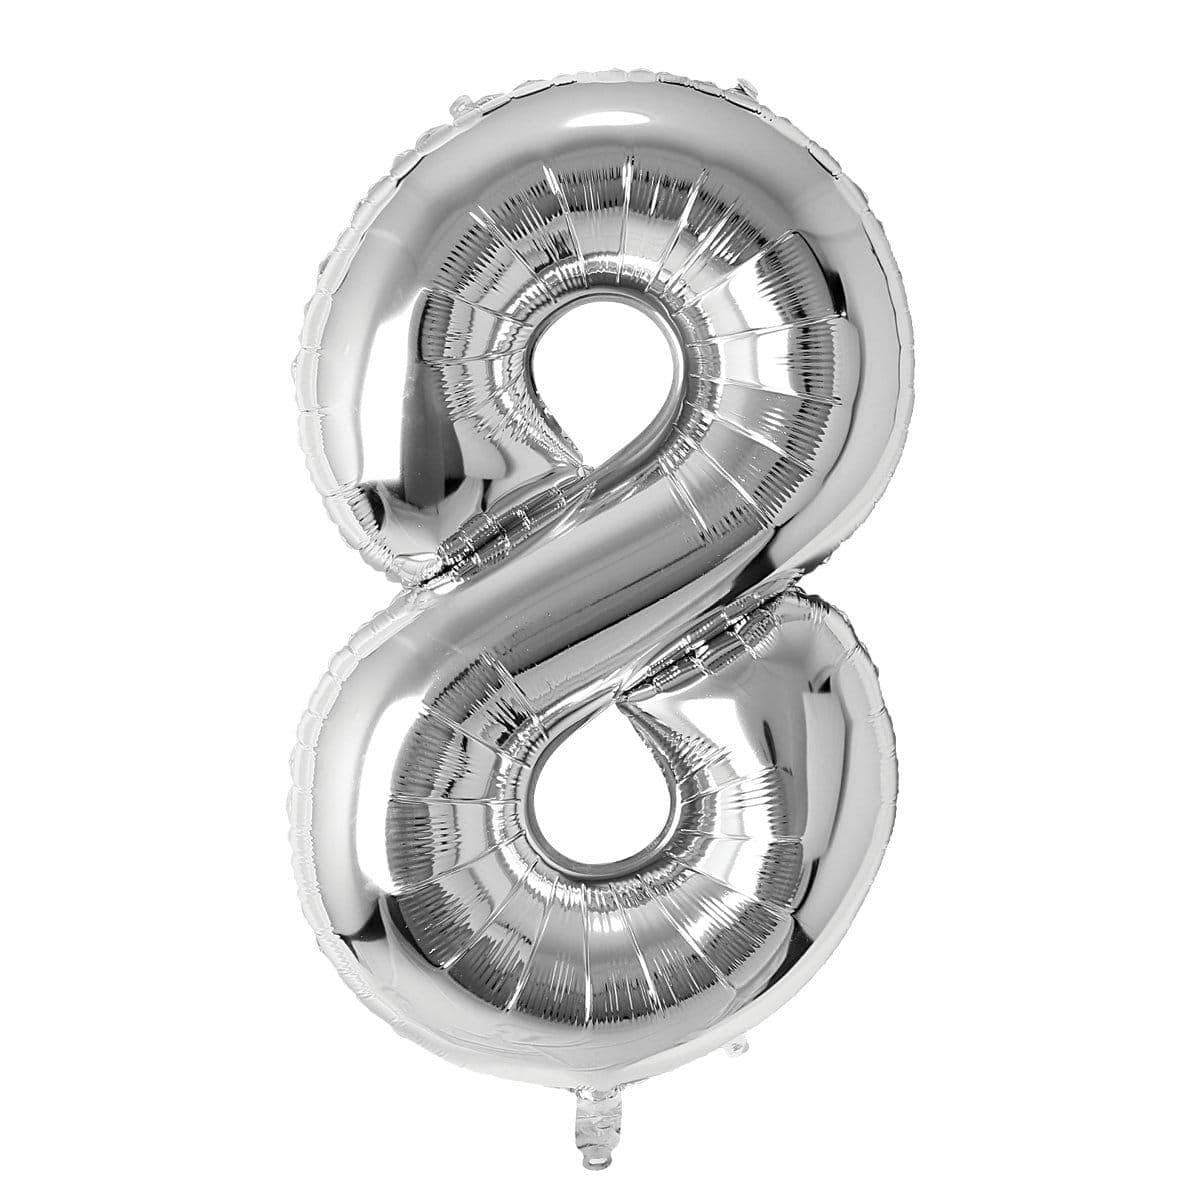 Buy Balloons Silver Number 8 Foil Balloon, 34 Inches sold at Party Expert